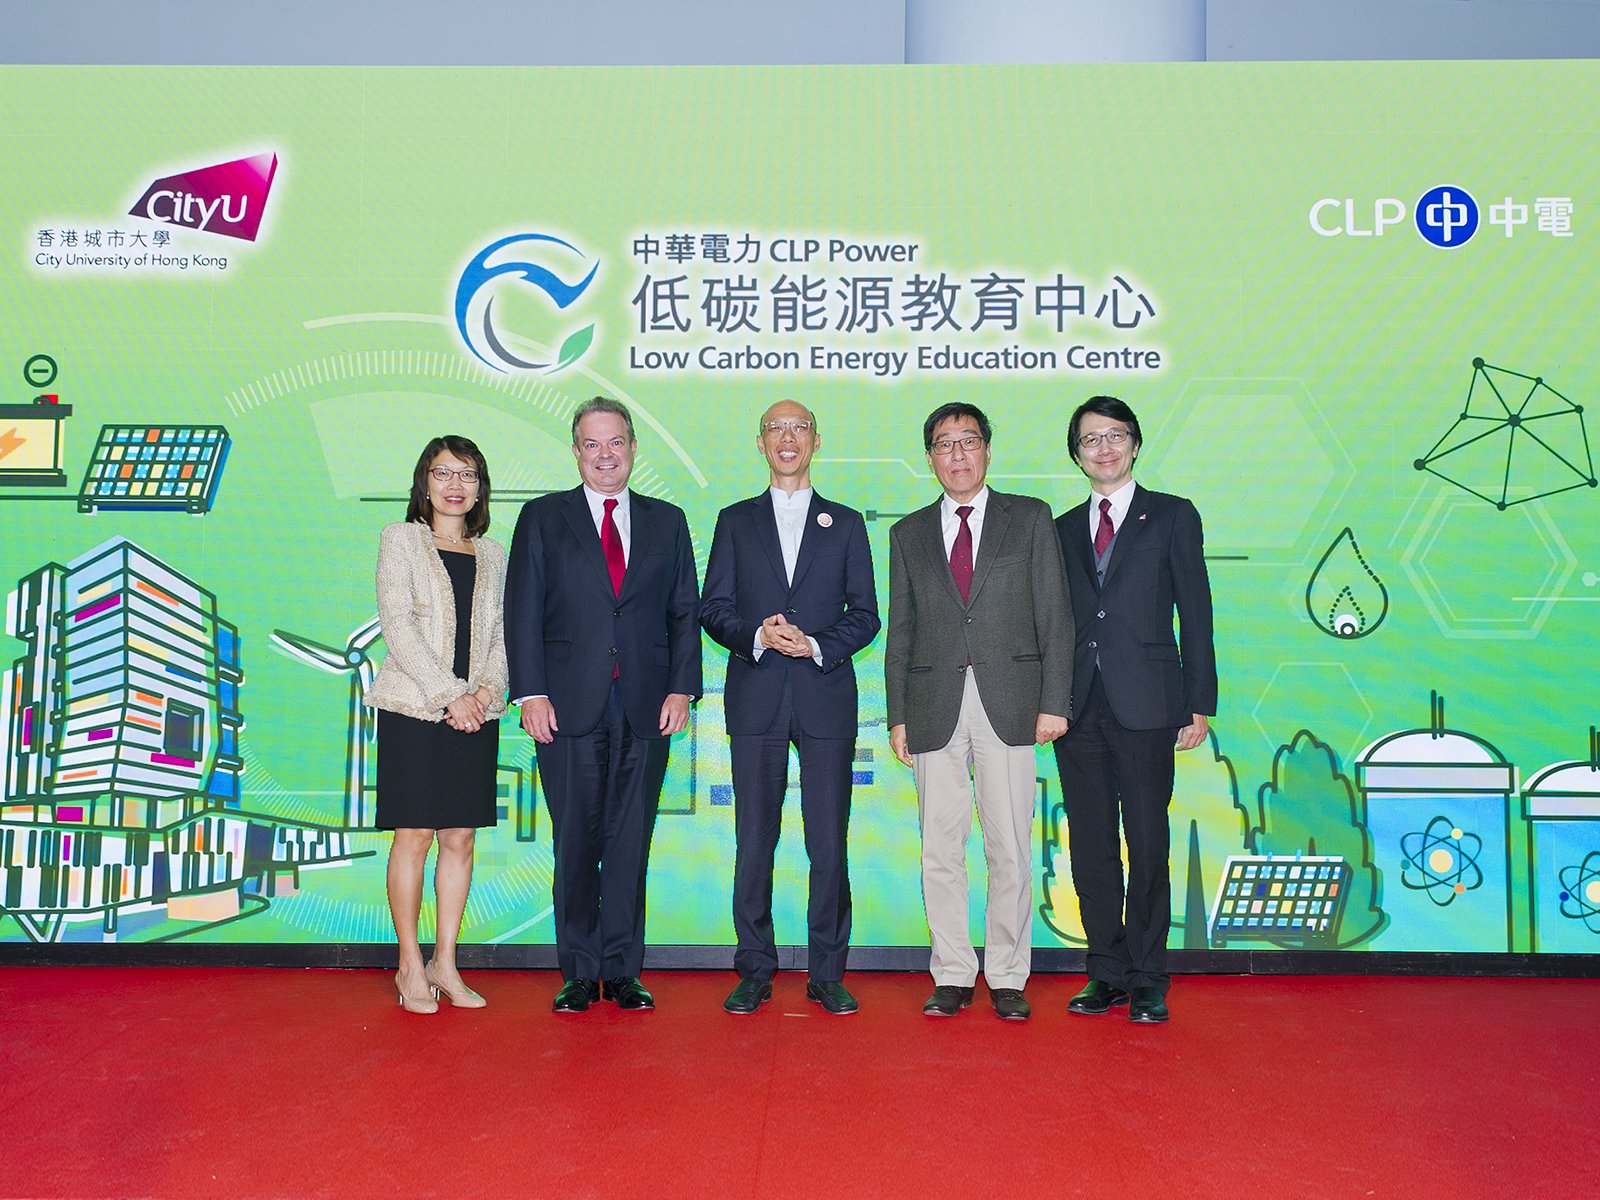 (From left) Mrs Betty Yuen, Group Director and Vice-Chairman of CLP Power, Mr Richard Lancaster, Chief Executive Officer of CLP Holdings, Mr Wong Kam-sing, Secretary for the Environment of the HKSAR, Professor Way Kuo, CityU President, and Professor Matthew Lee, CityU Vice-President of (Development and External Relations), officiate at the opening ceremony of the CLP Power Low Carbon Energy Education Centre.